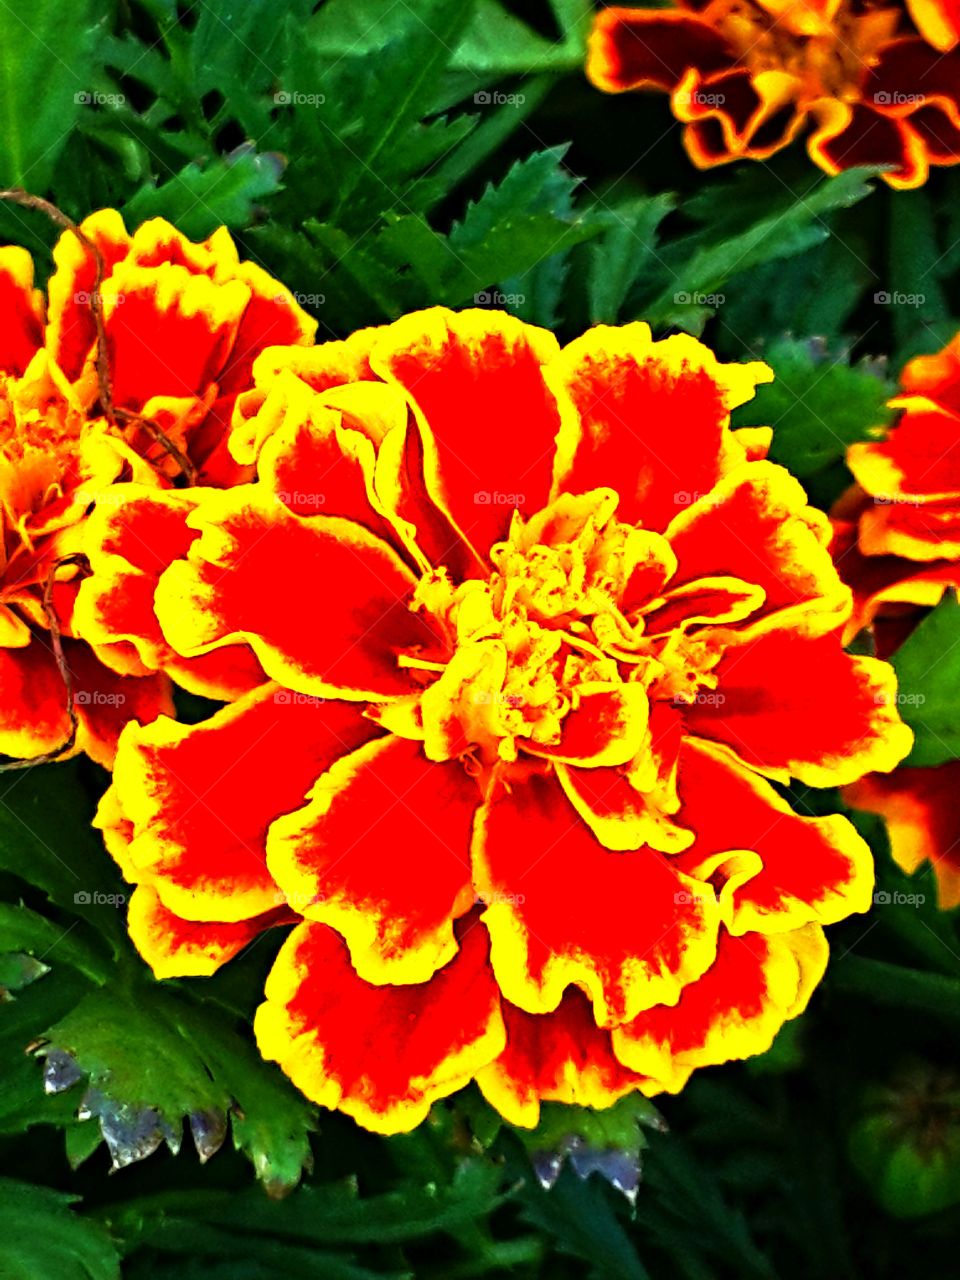 Yellow and red flower